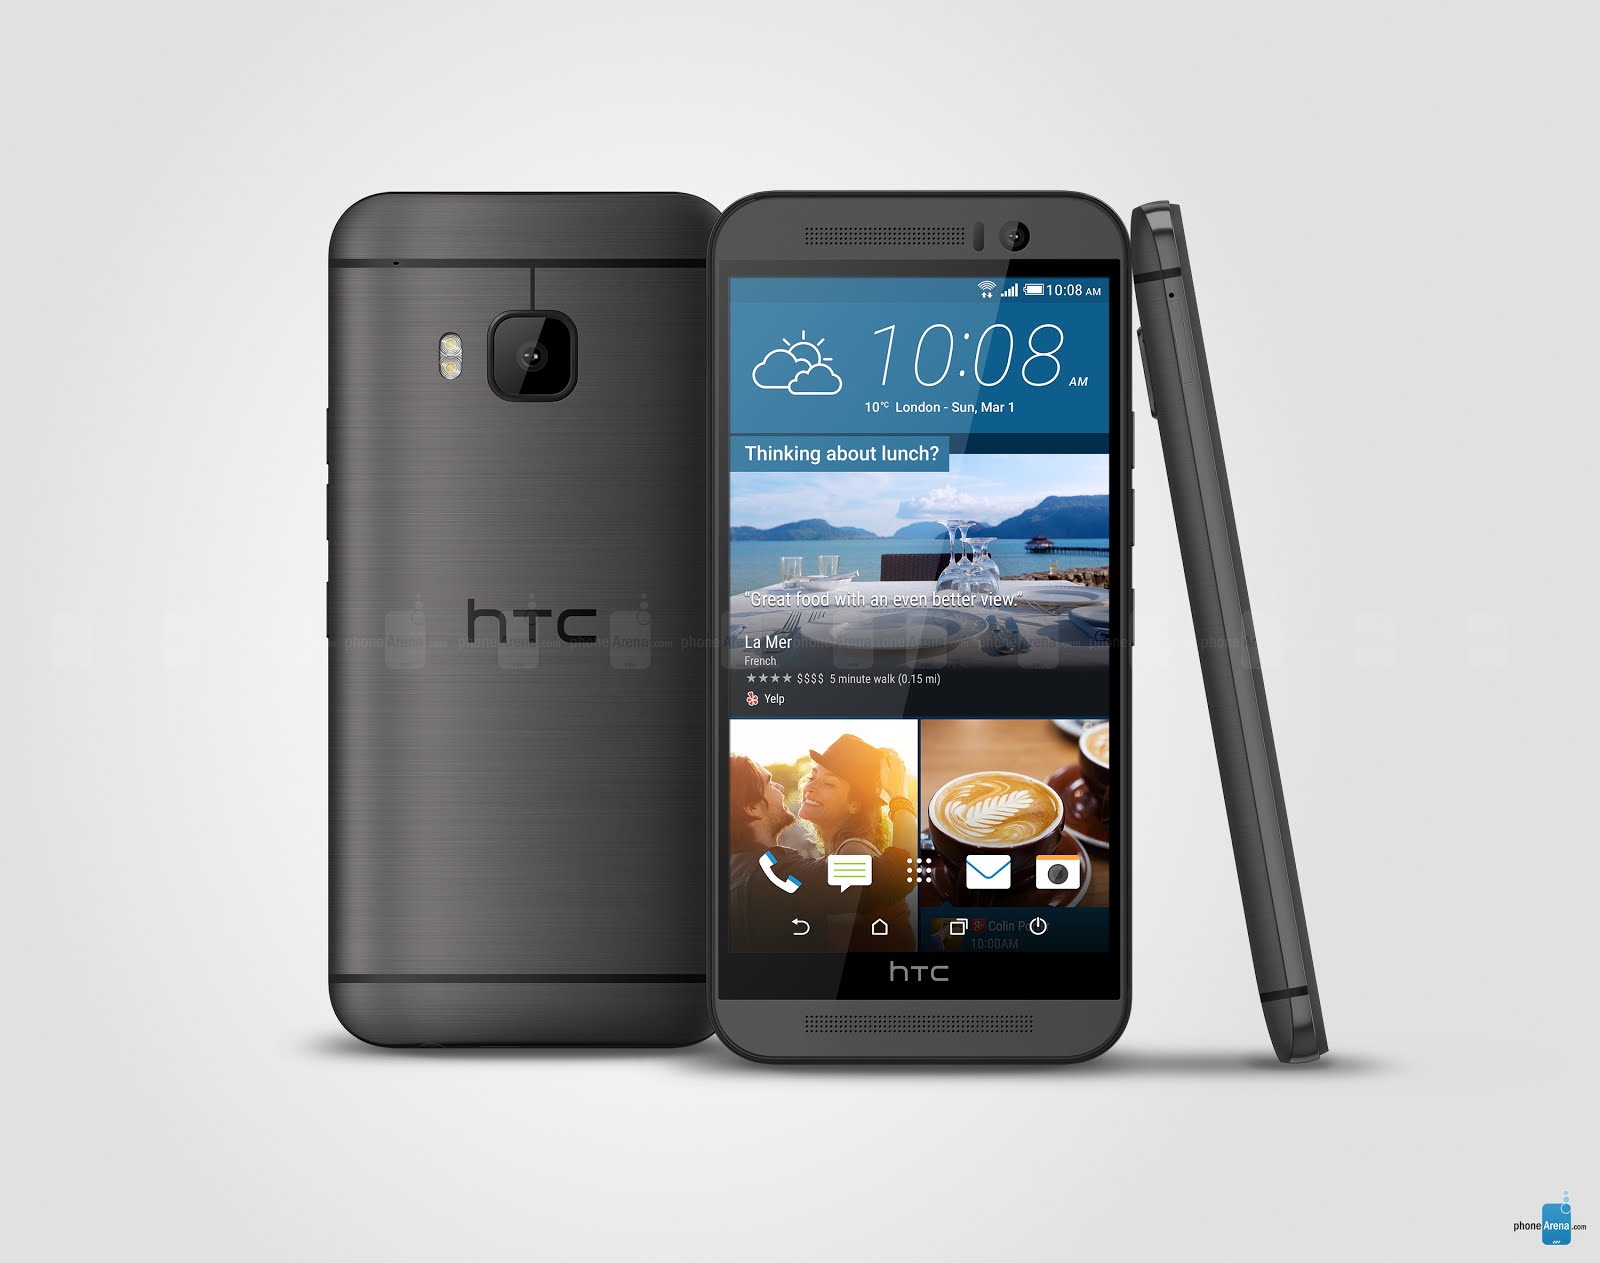 My Phone is HTC One M9.